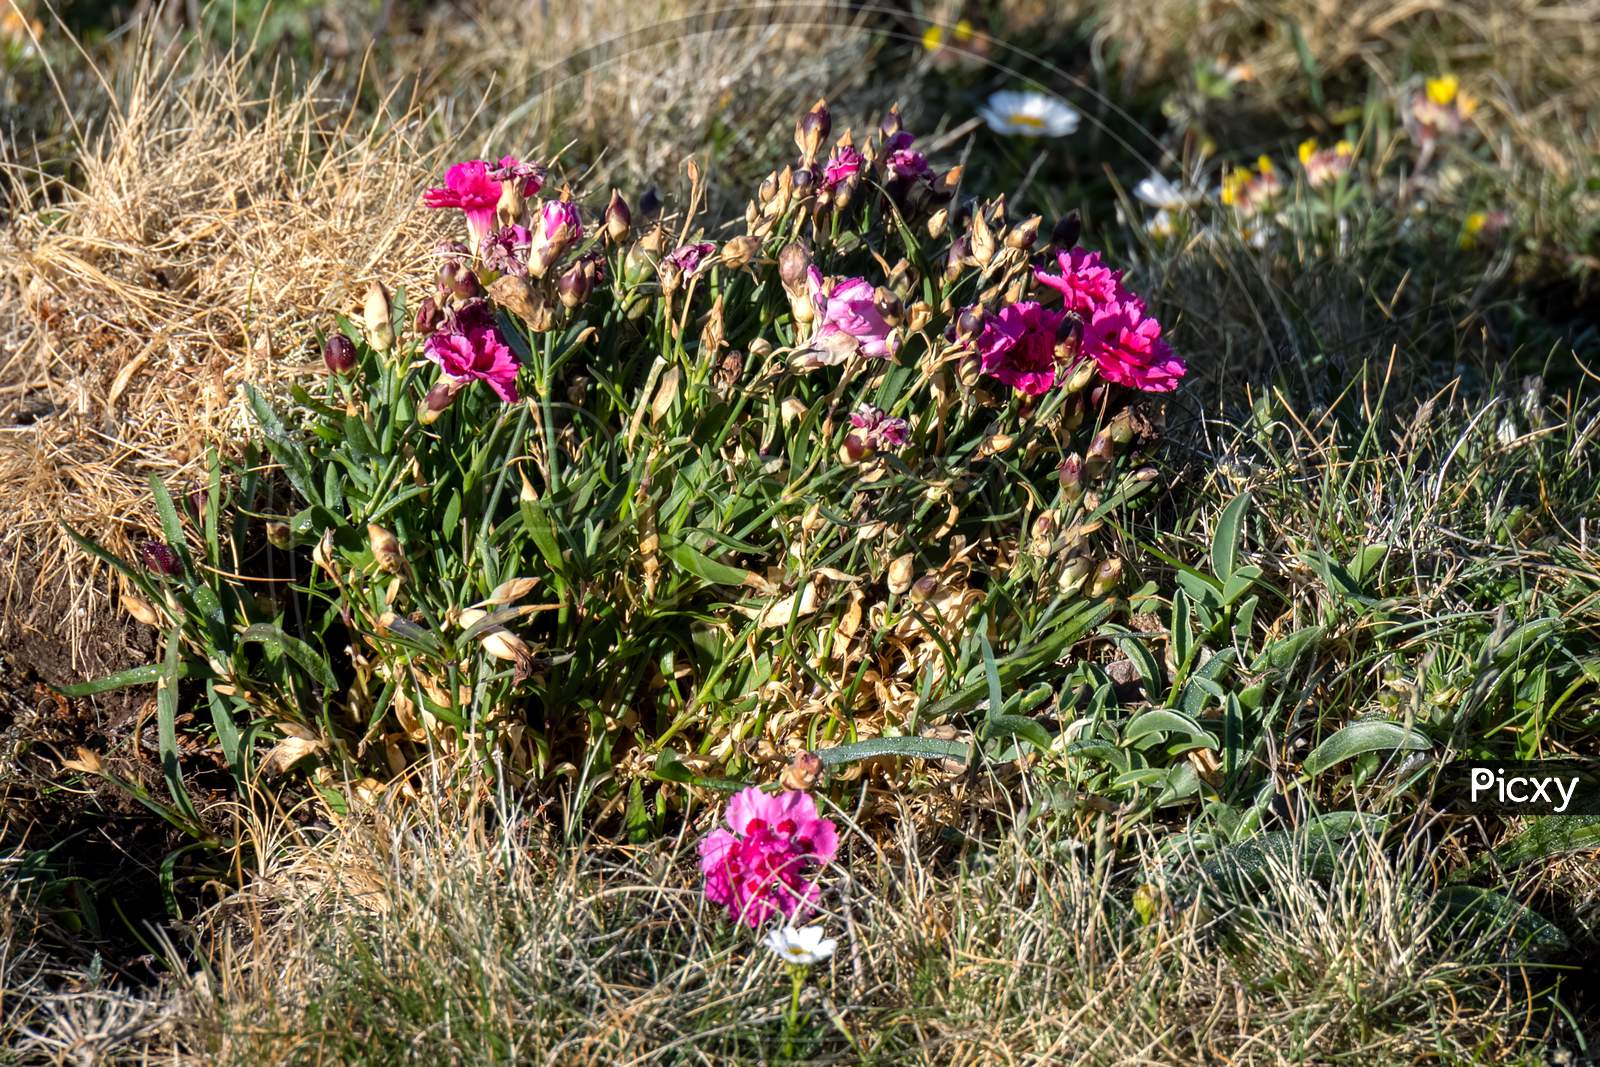 Wild Carnation (Dianthus Caryophyllus) Flowering In The Spring Sunshine At Kynance Cove